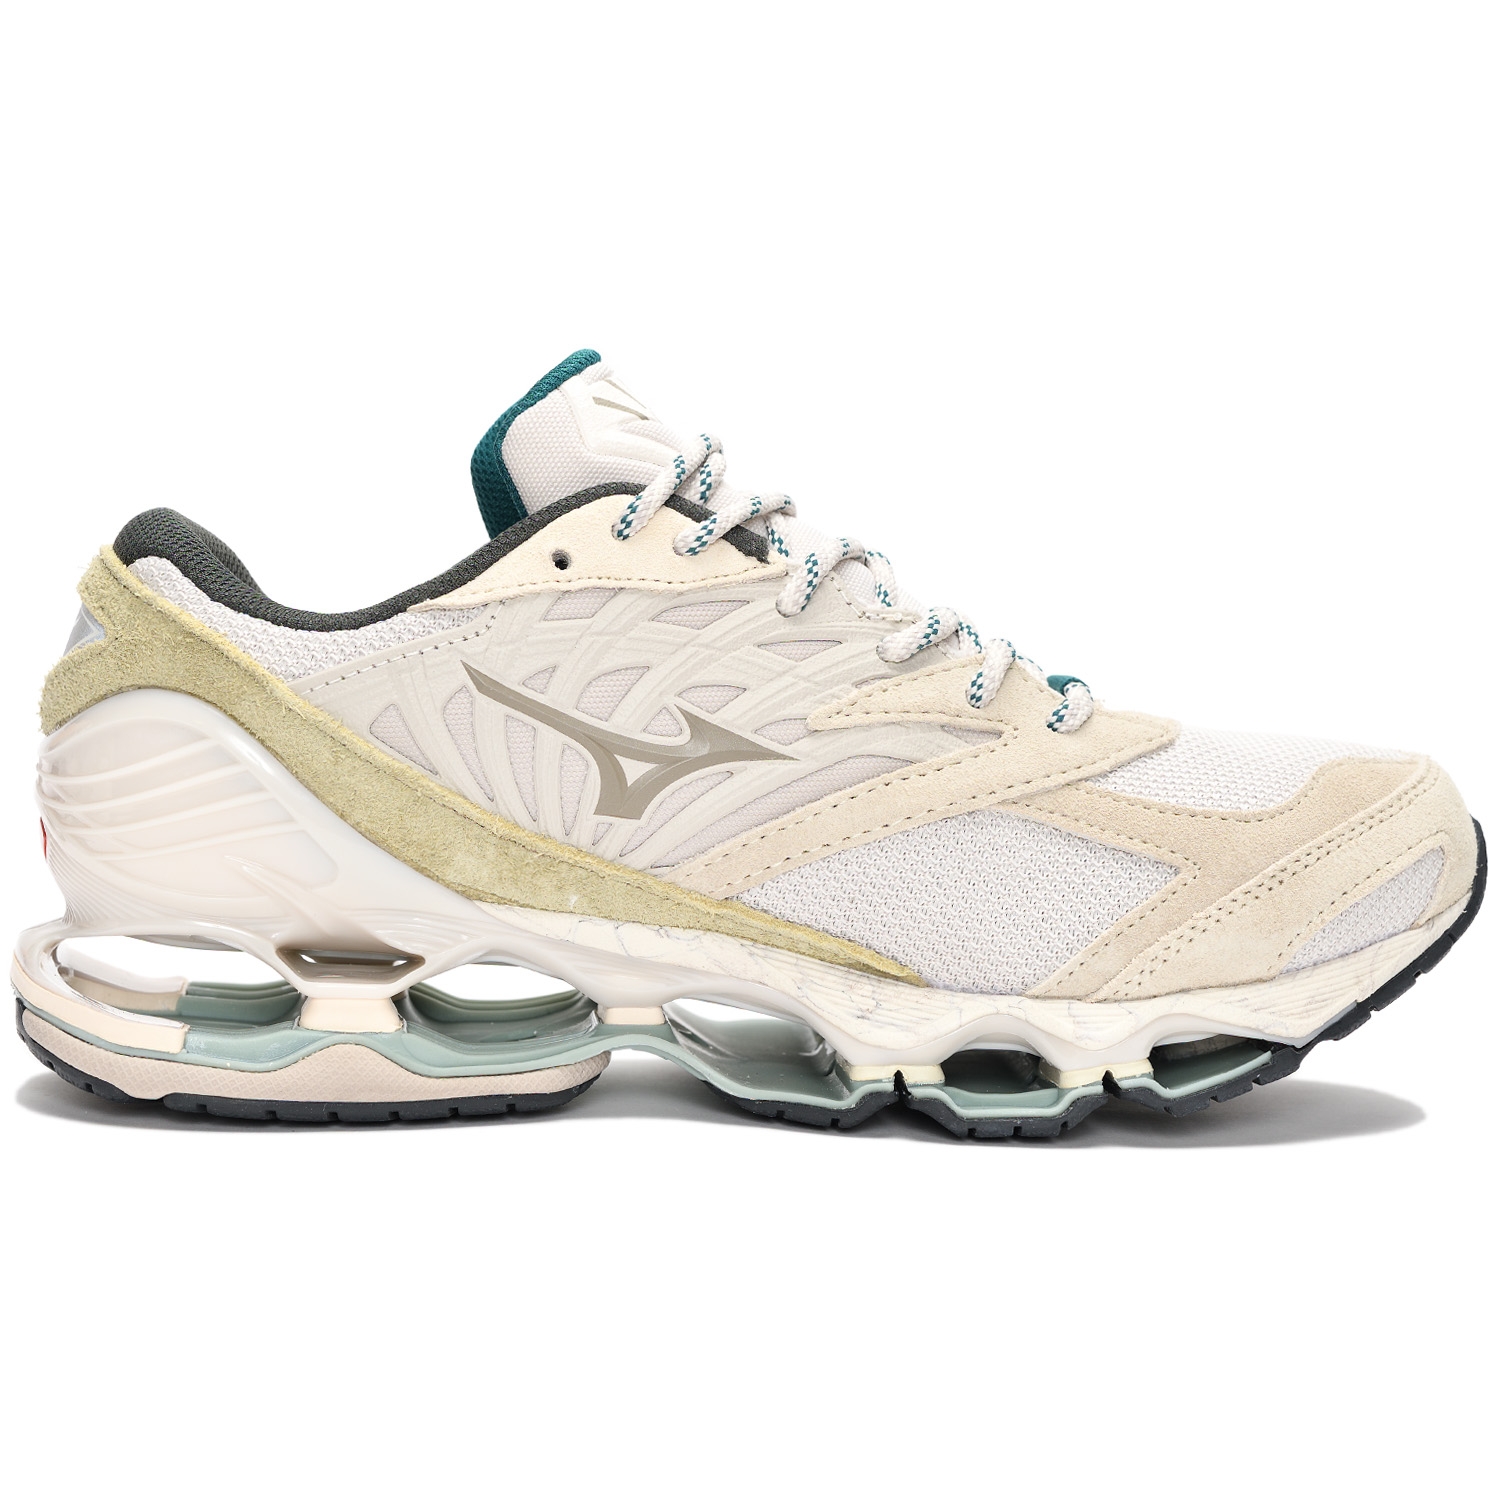 Mizuno Wave Prophecy LS "Nomad Pack" Silver Cloud